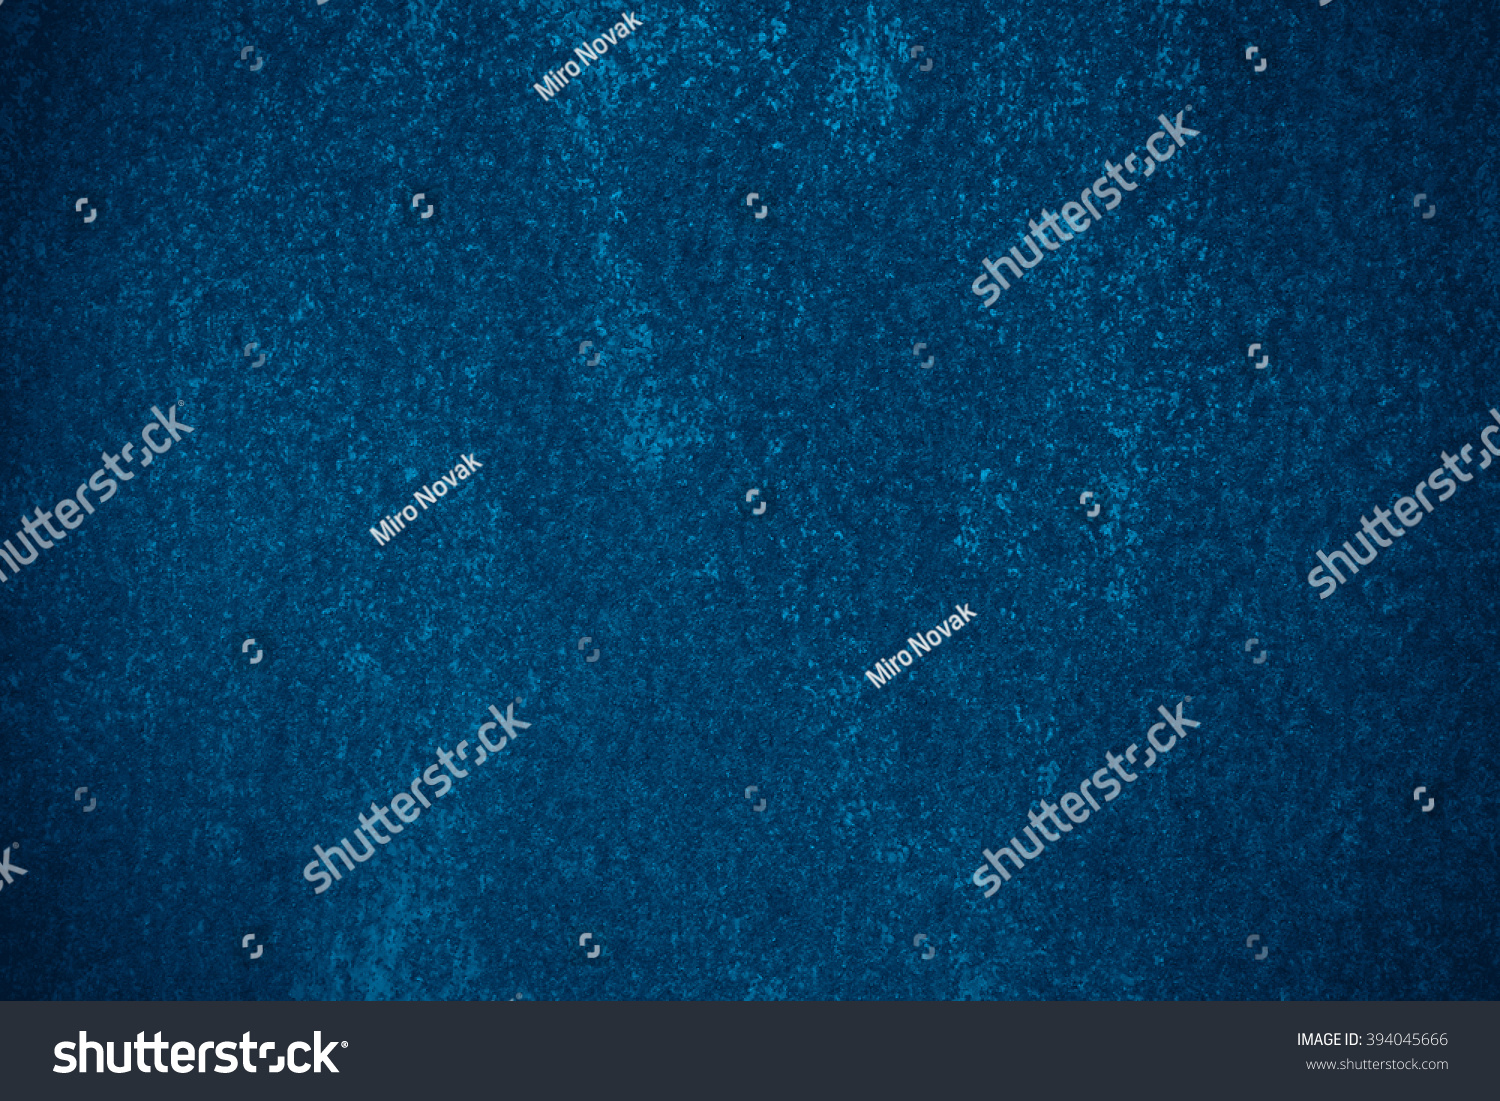 blue abstract background or rust steel texture #394045666